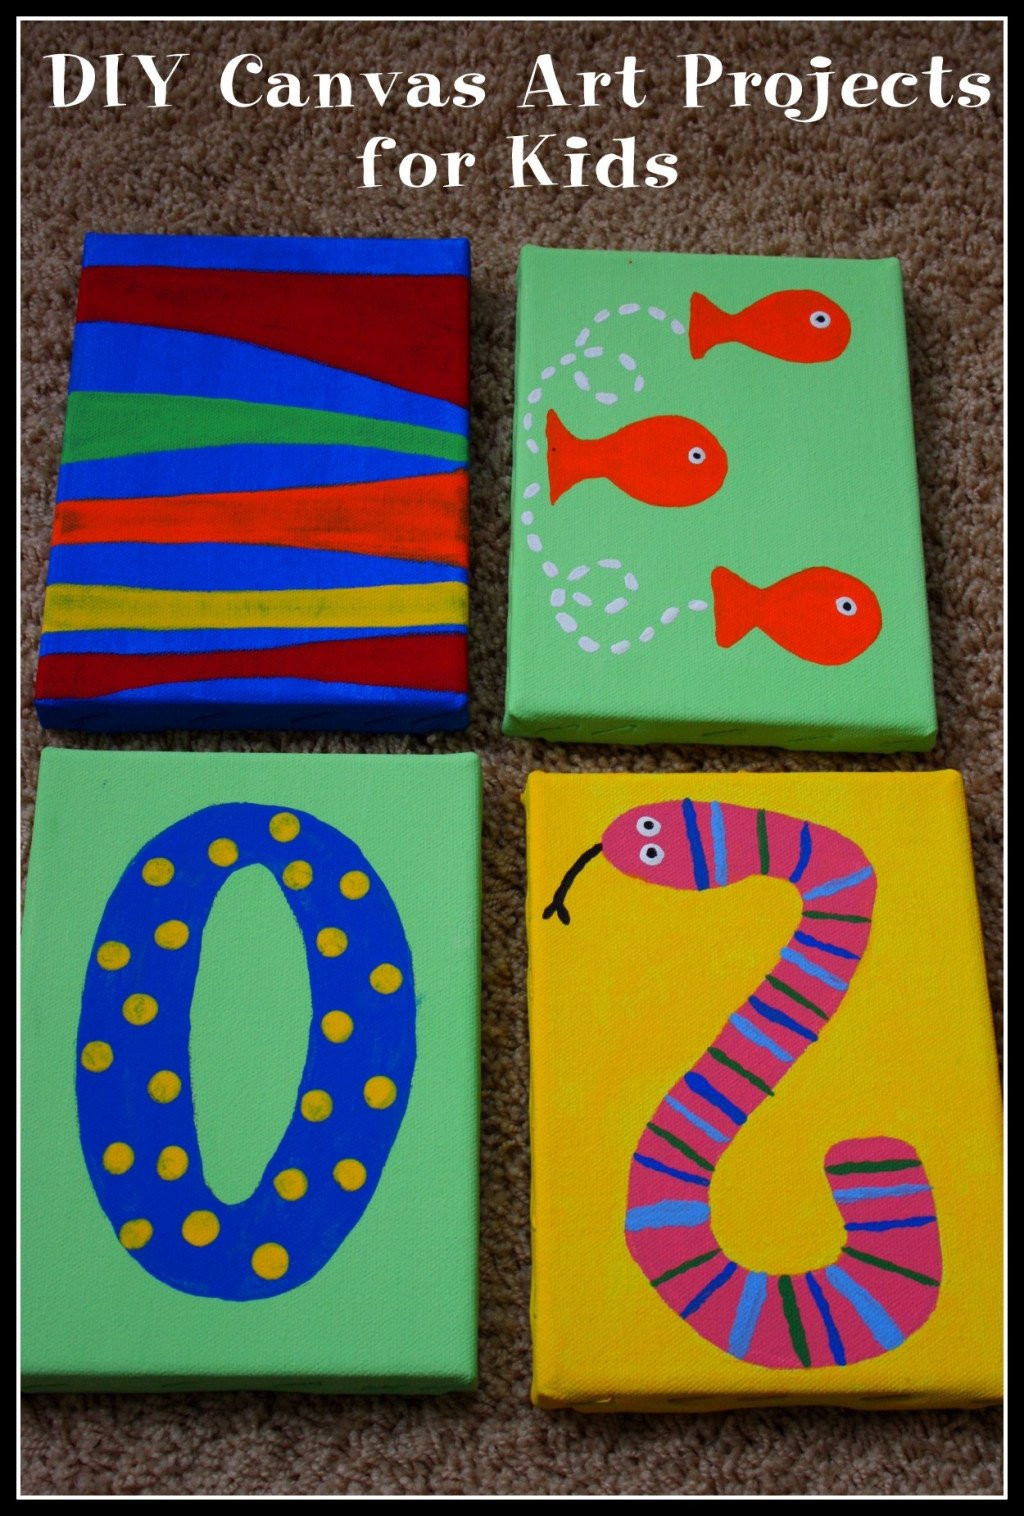 DIY Art Projects For Kids
 DIY Canvas Art Projects for Kids